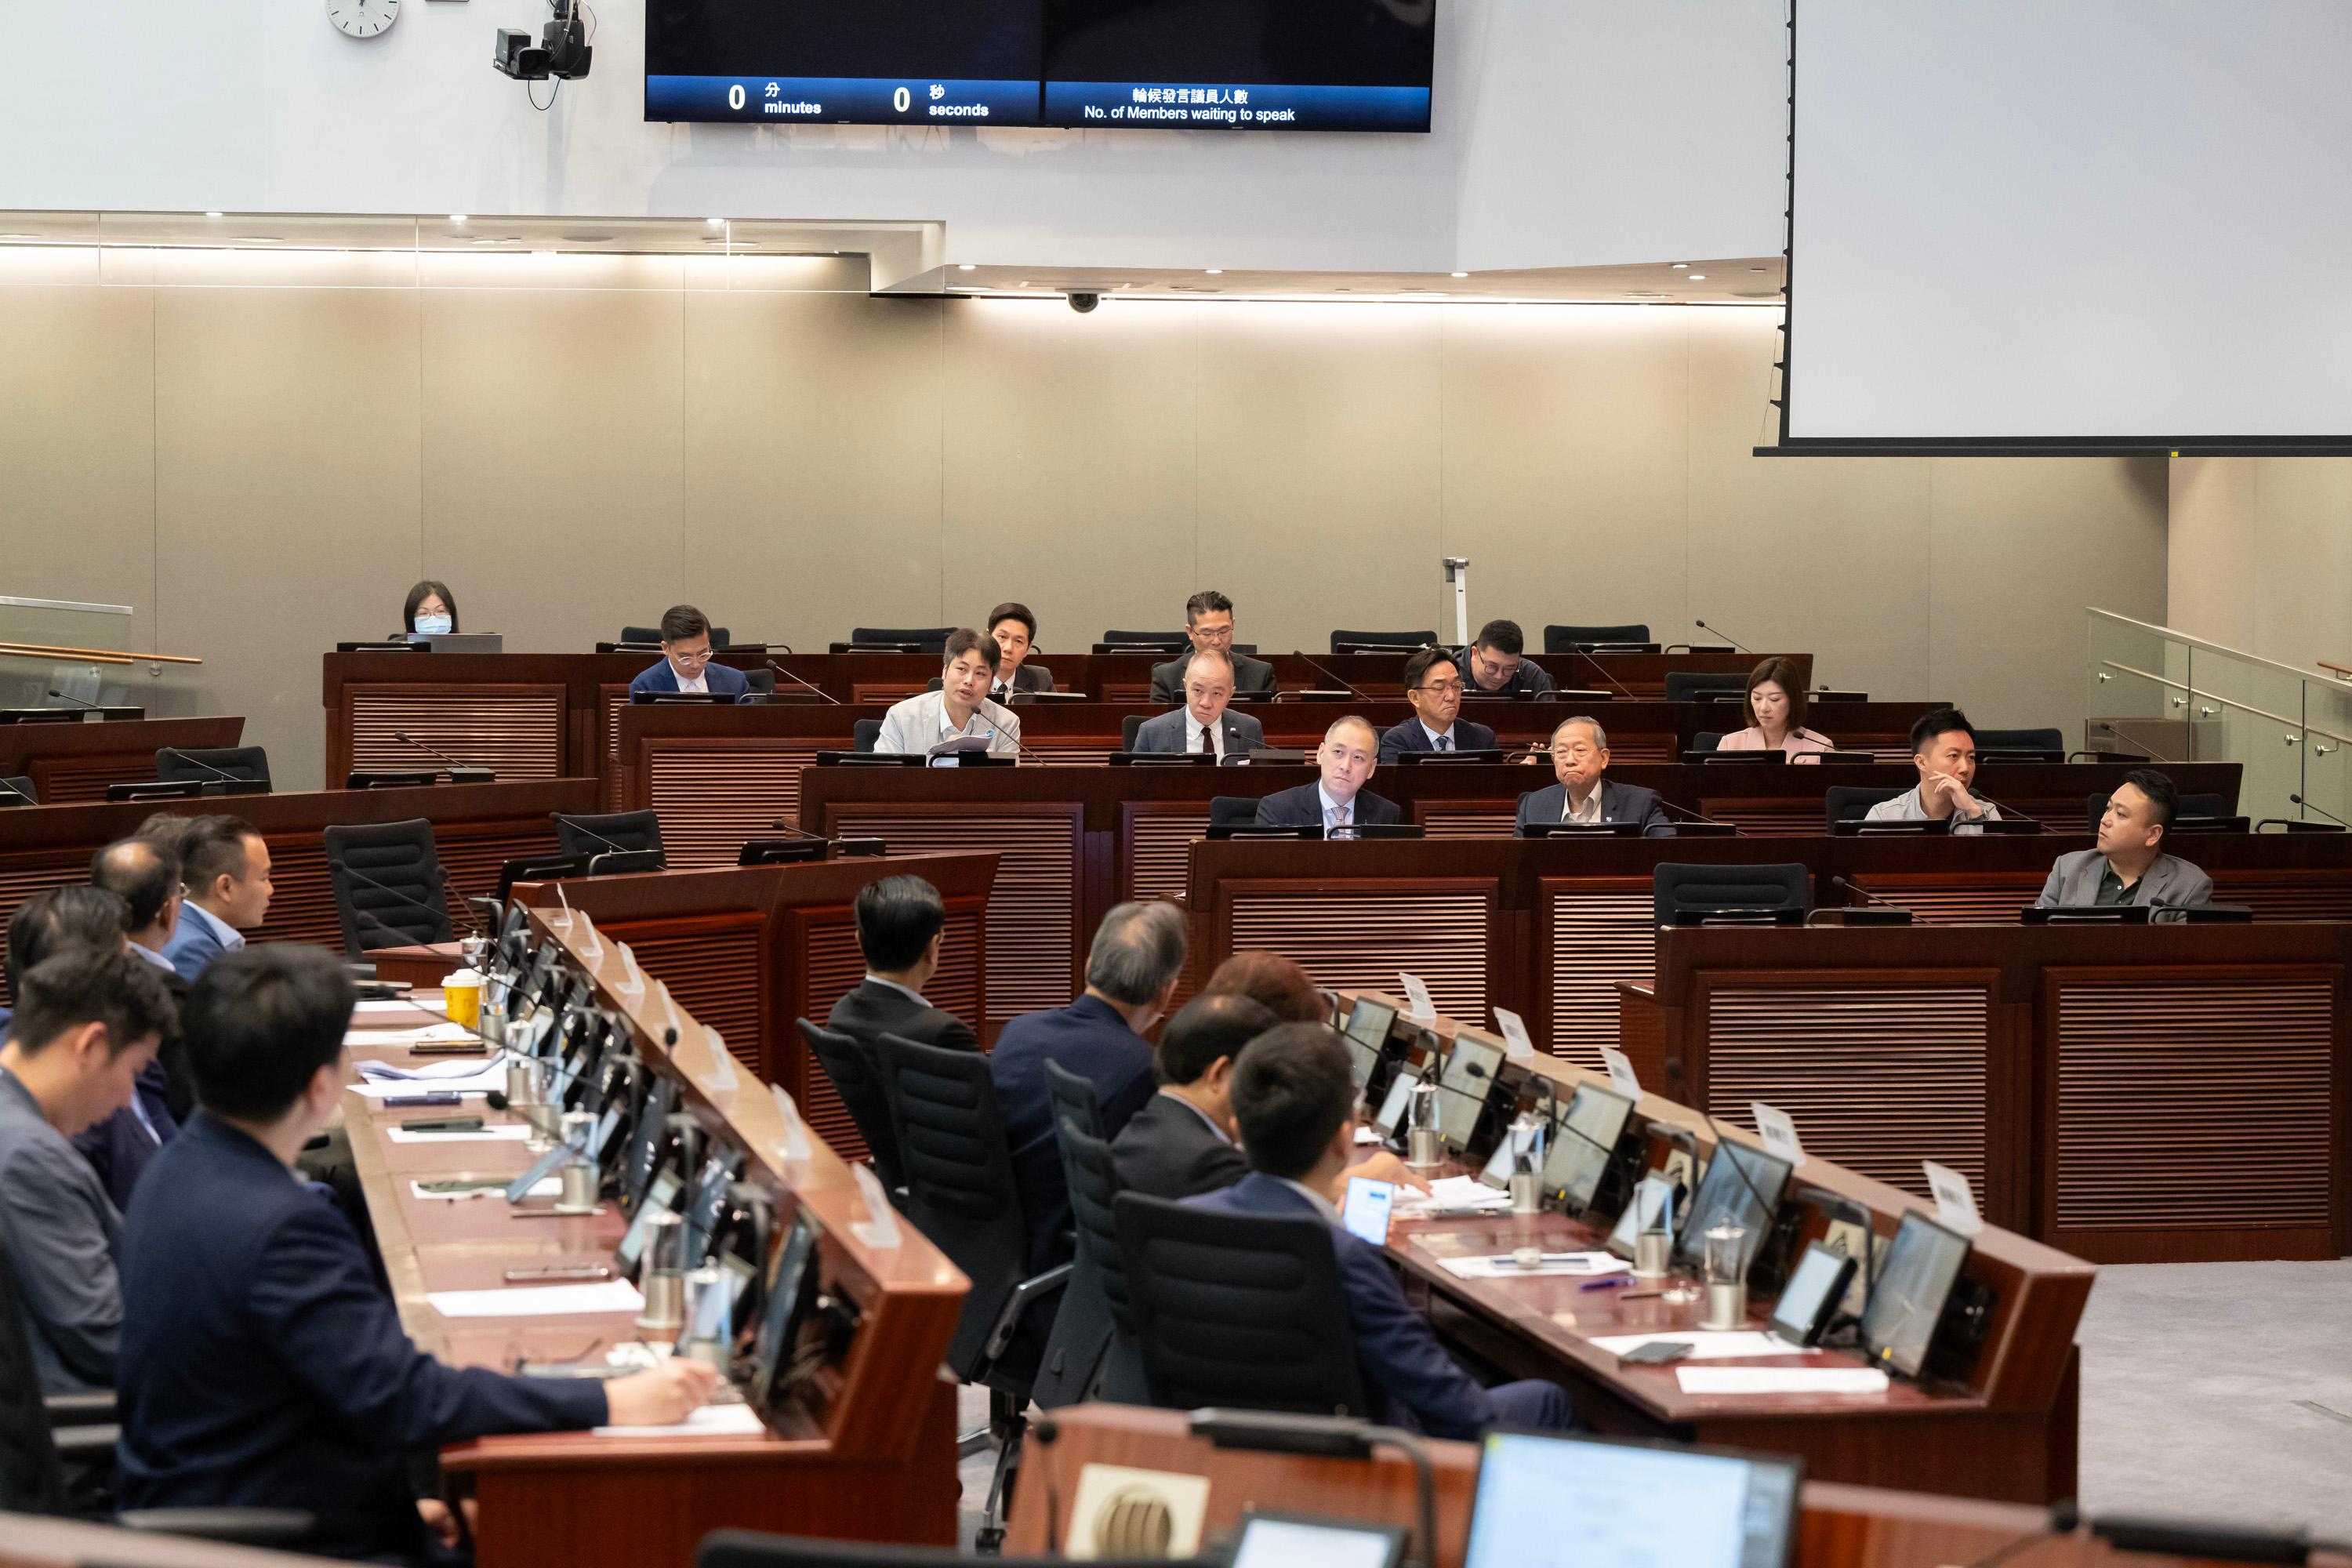 The Legislative Council (LegCo) Members meet with the new term Tai Po District Council (DC) and Central and Western DC members at the LegCo Complex today (May 31). Photo shows LegCo Members and members of the Tai Po DC exchanging views on improving the ancillary facilities of Lam Tsuen River.
